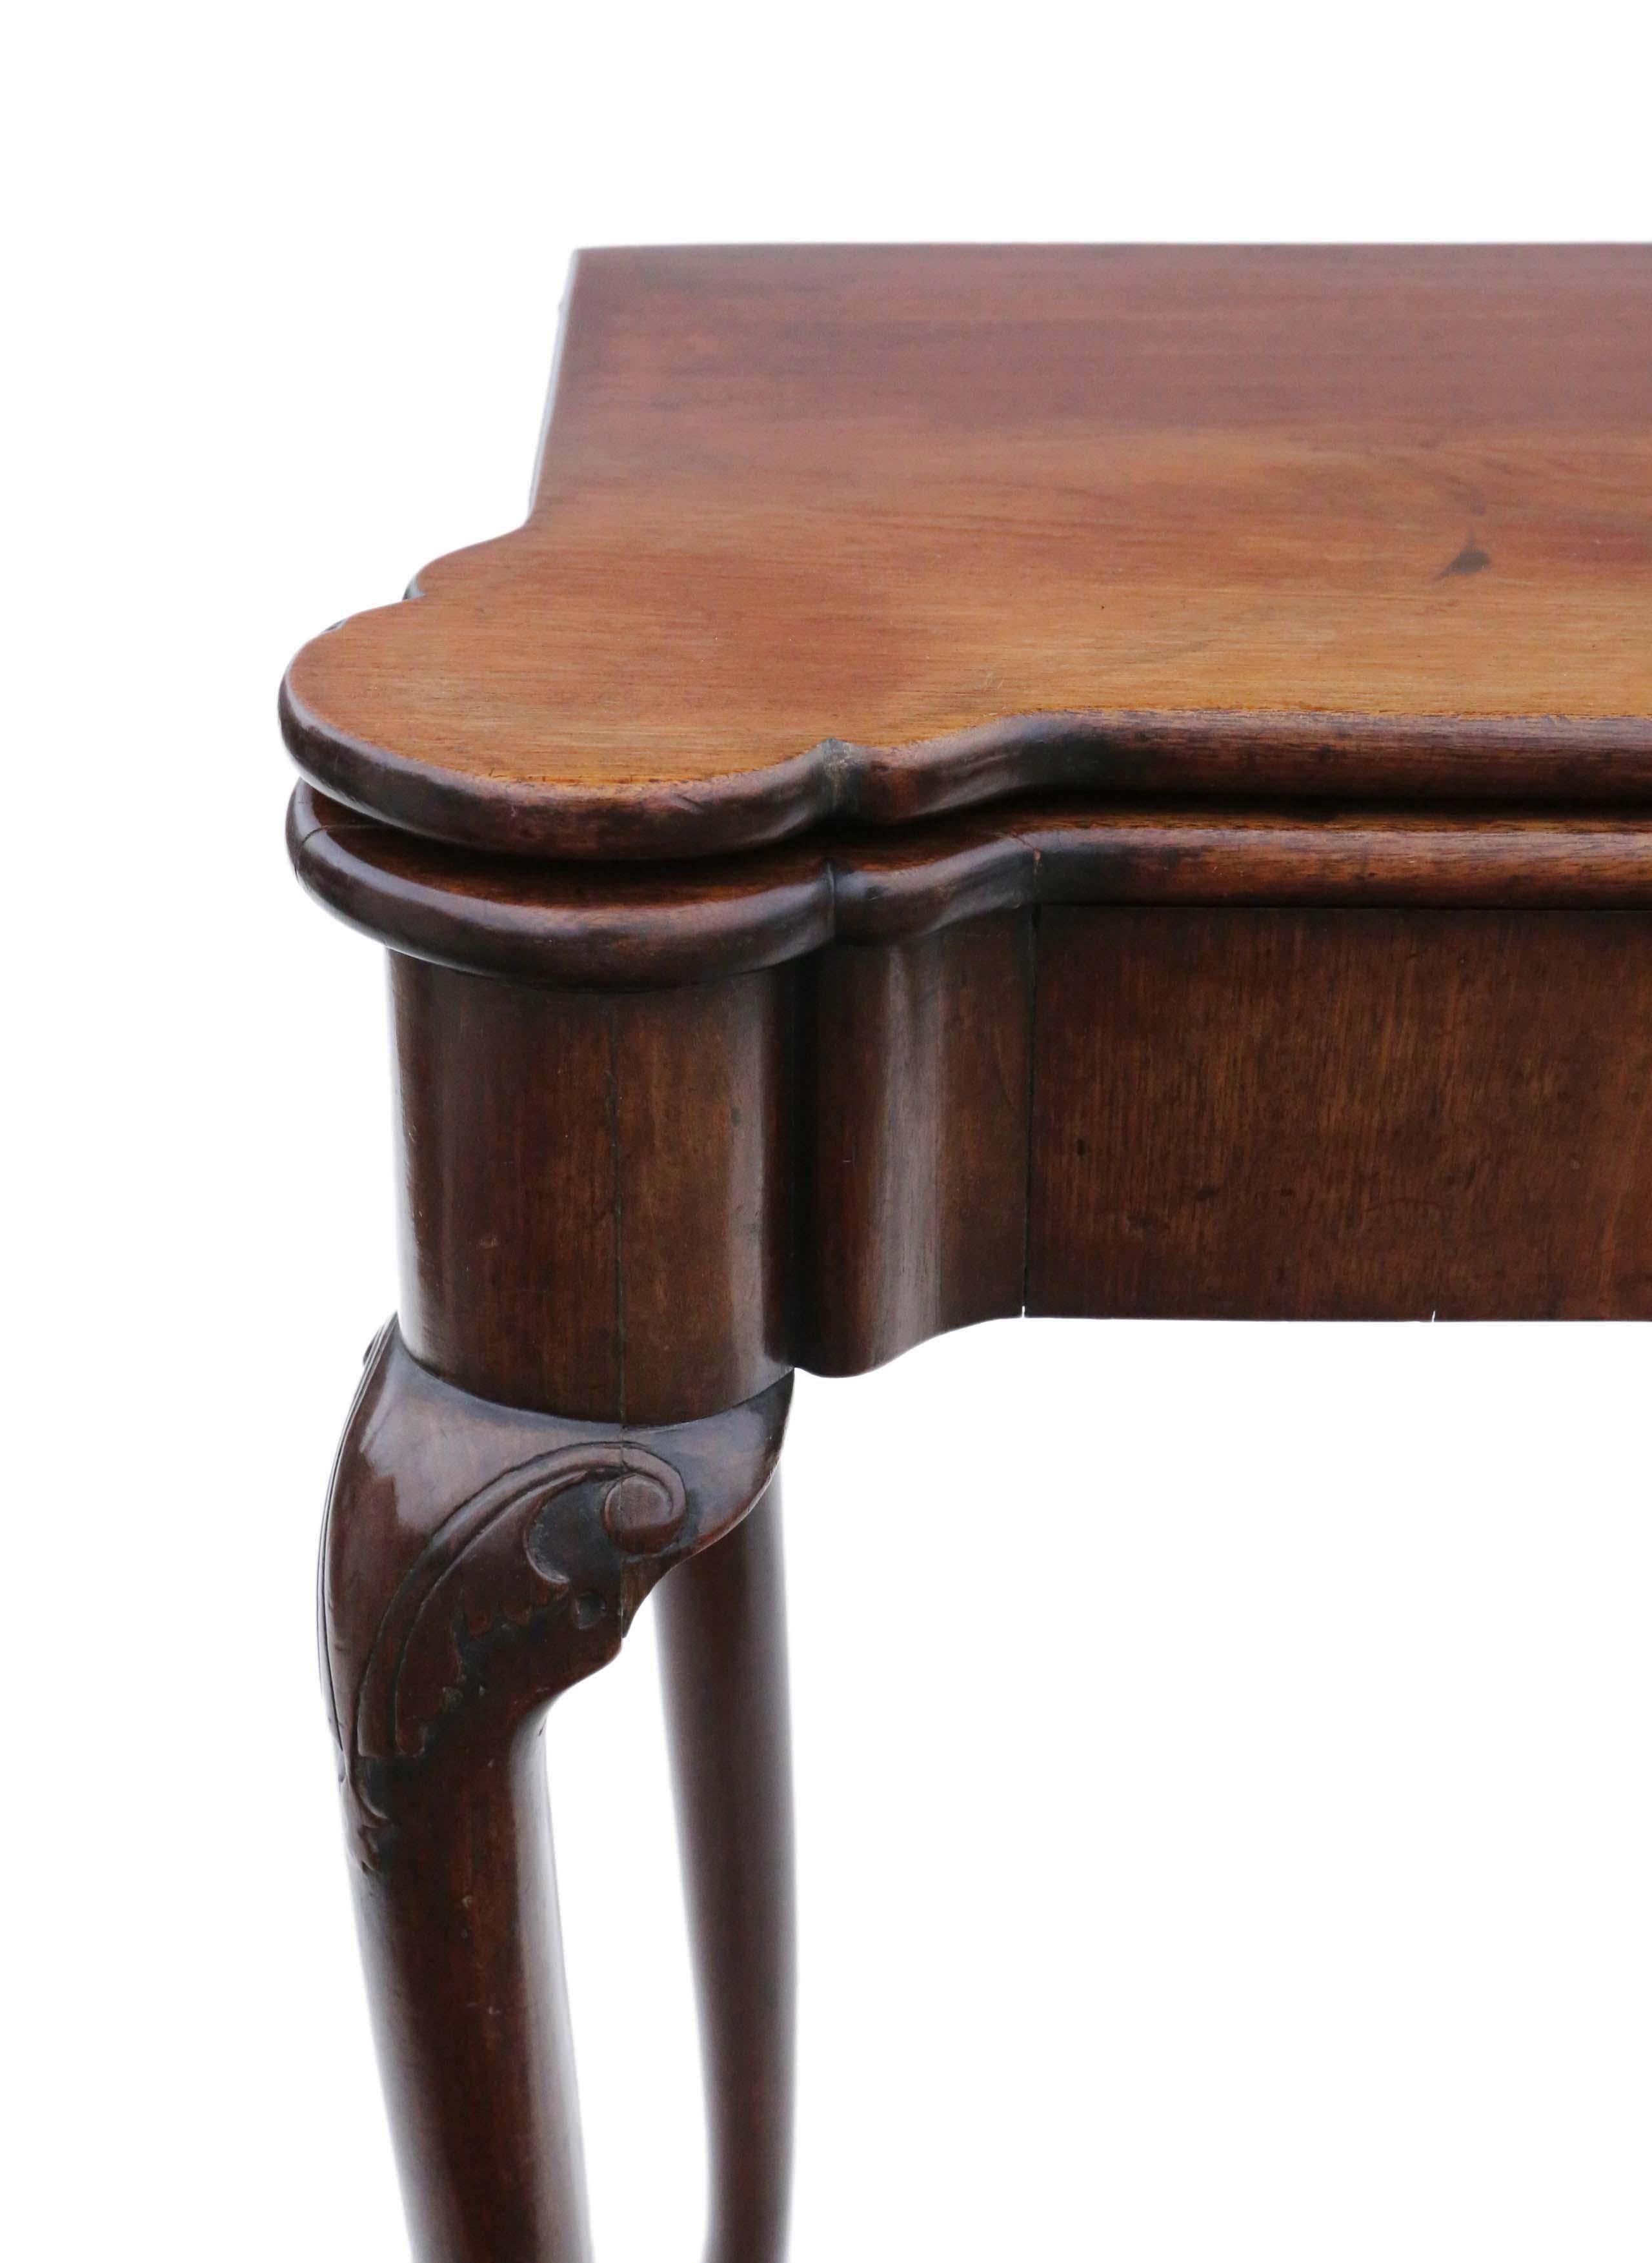 Antique Georgian George II Inlaid Mahogany Folding Card Tea Table In Good Condition For Sale In Wisbech, Cambridgeshire